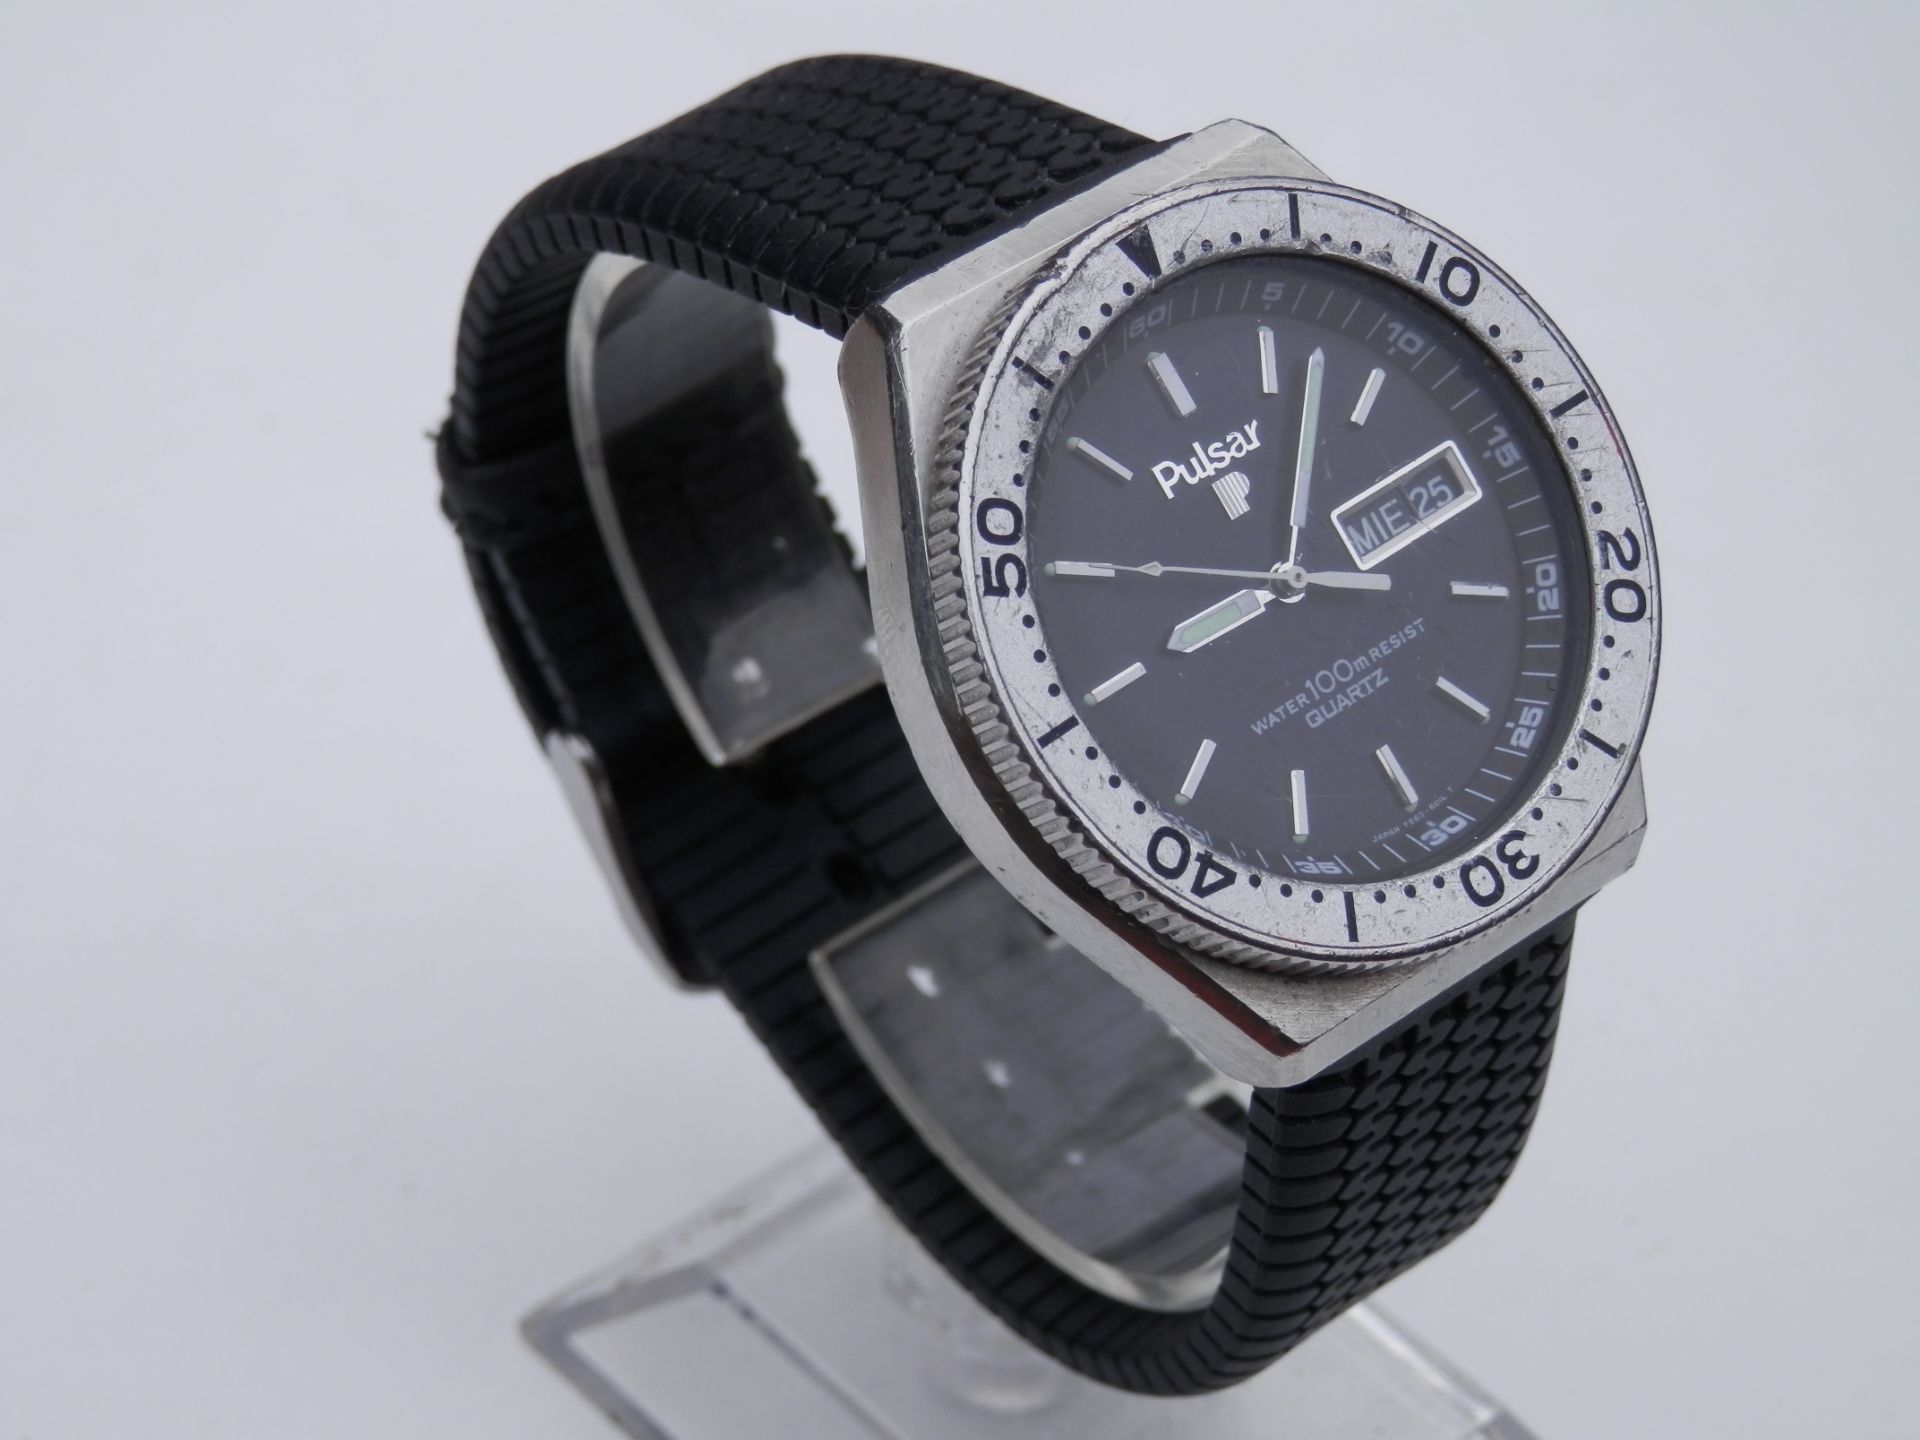 RARE GENTS 1980S PULSAR Y563 DIVERS STYLE 100M WATER RESISTANT QUARTZ DAY/DATE WATCH, WORKING. - Image 2 of 7